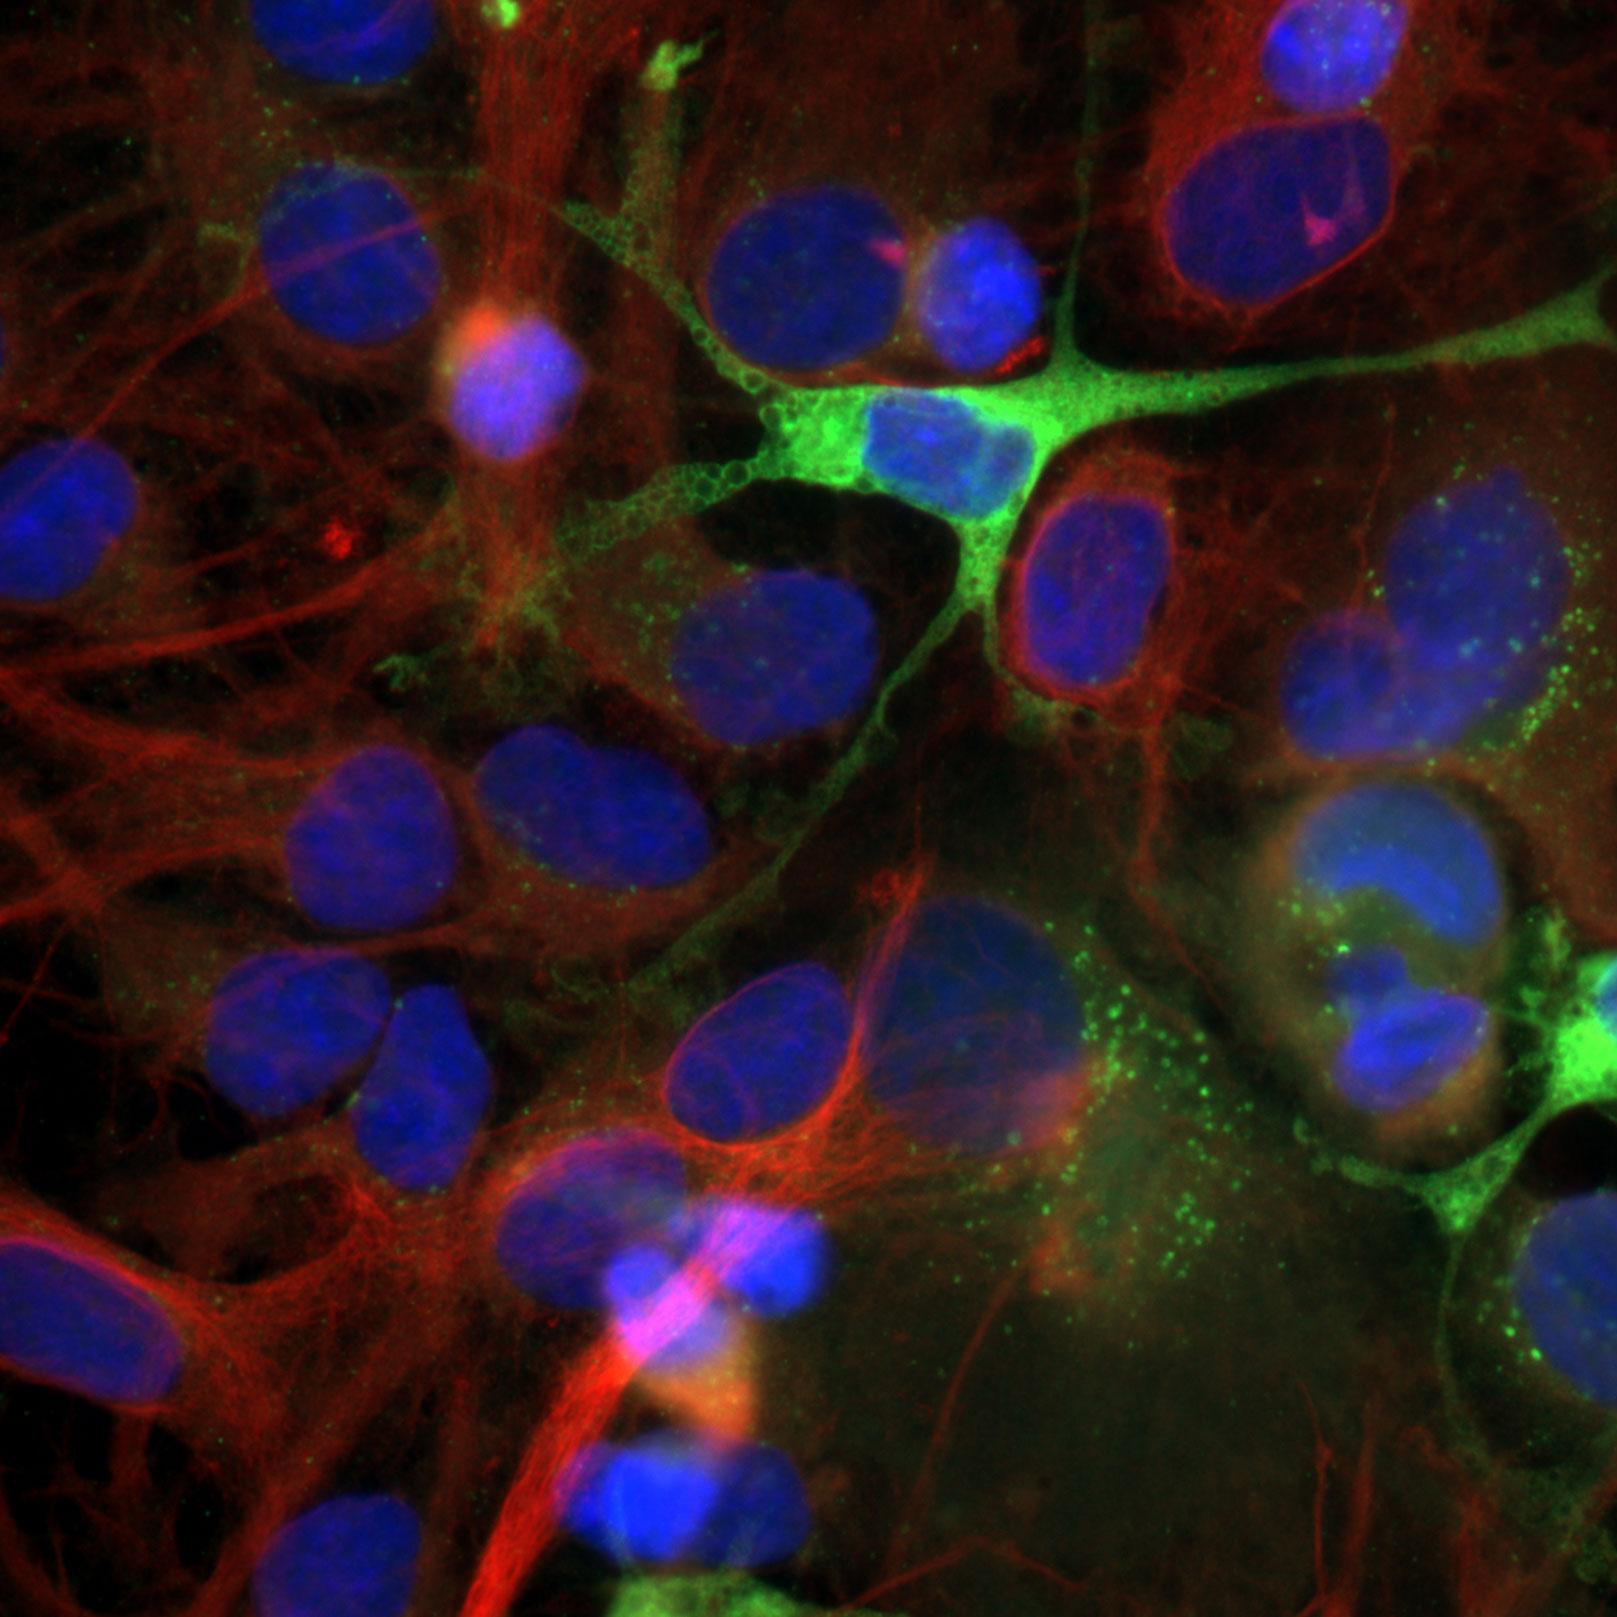 Astrocytes. Green: GFP, red: tubulin – Alexa 568, blue: Hoechst 33342, acquired with ZEISS Axio Imager.D2, objective: Plan APOCHROMAT 63× / 1.4